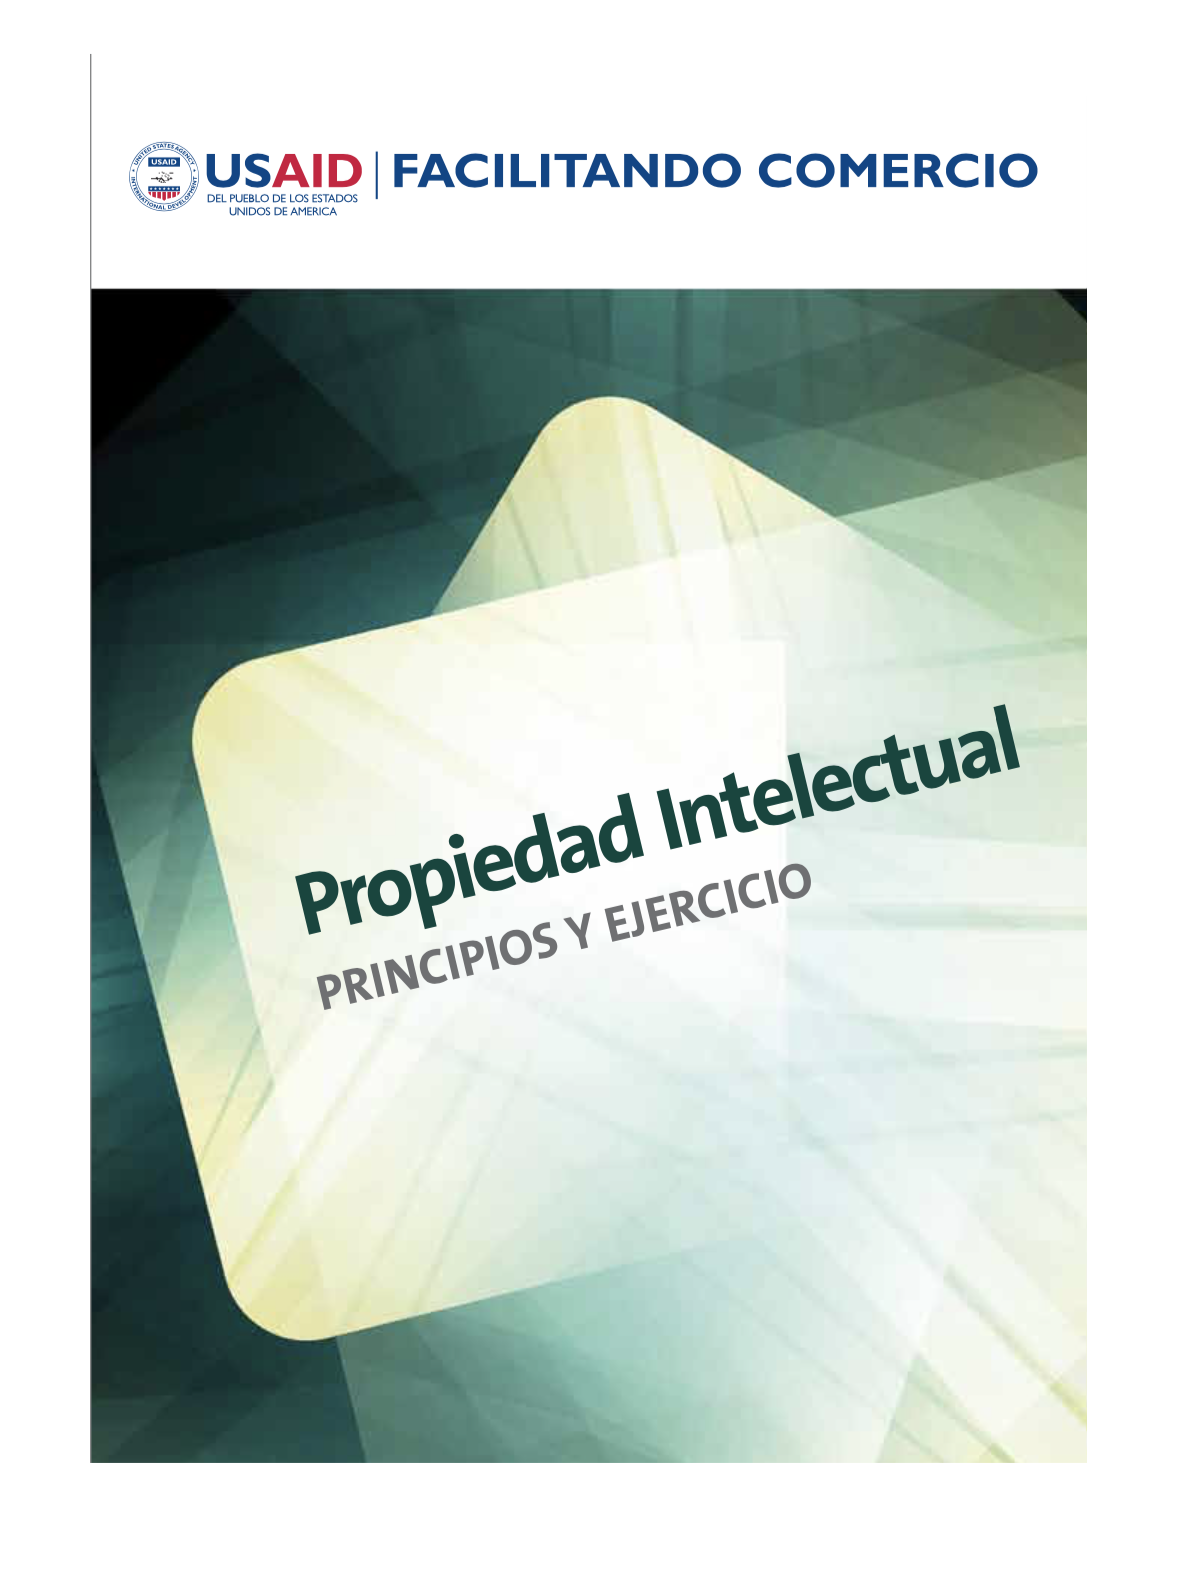 Schiantarelli is invited to be the author of the adaptation for Peru of the book Intellectual Property, Principles and Exercise